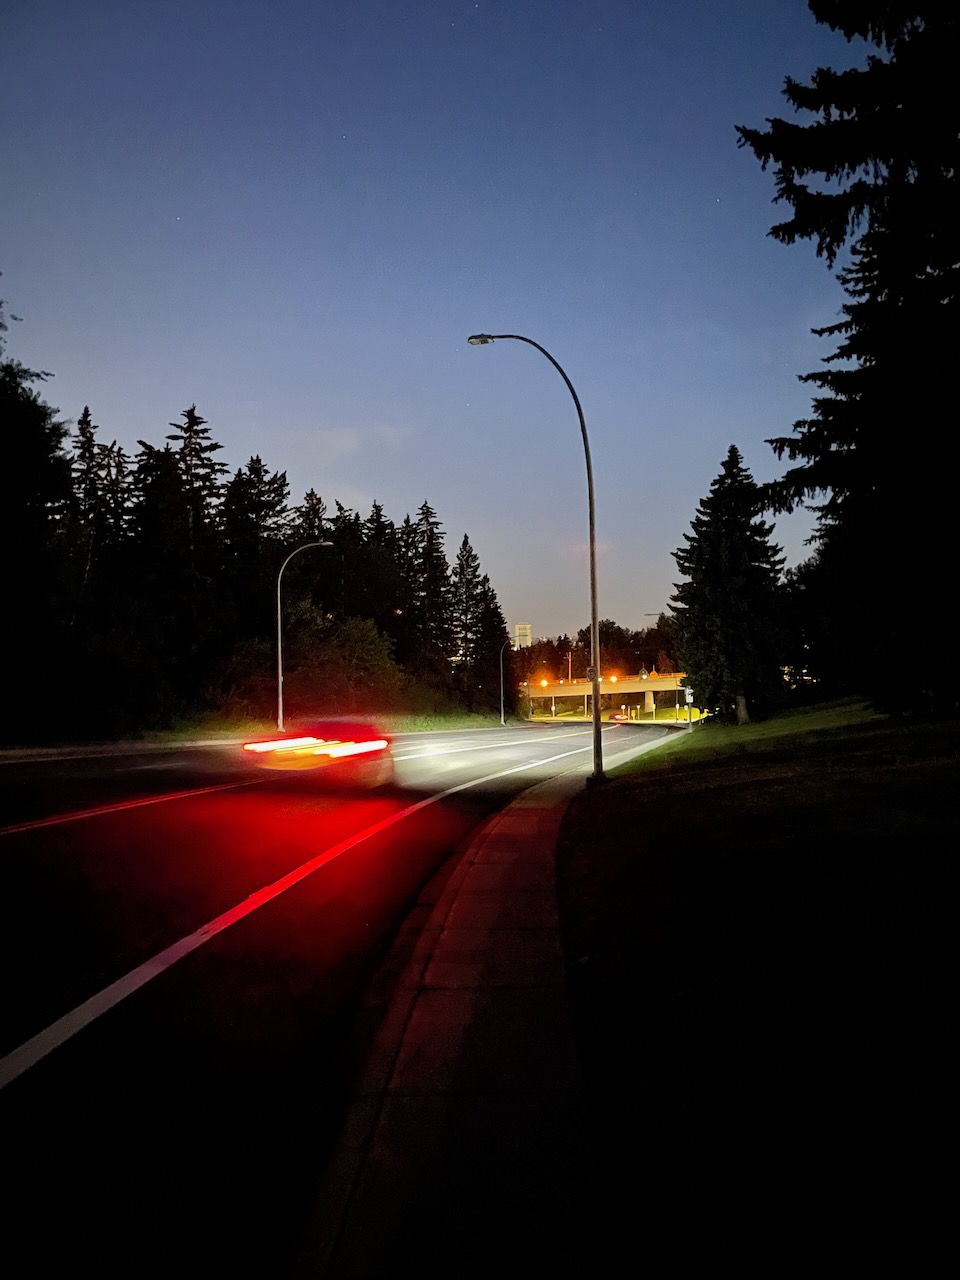 Photo at night of a dark hilly street and a taillight streak from a passing car.